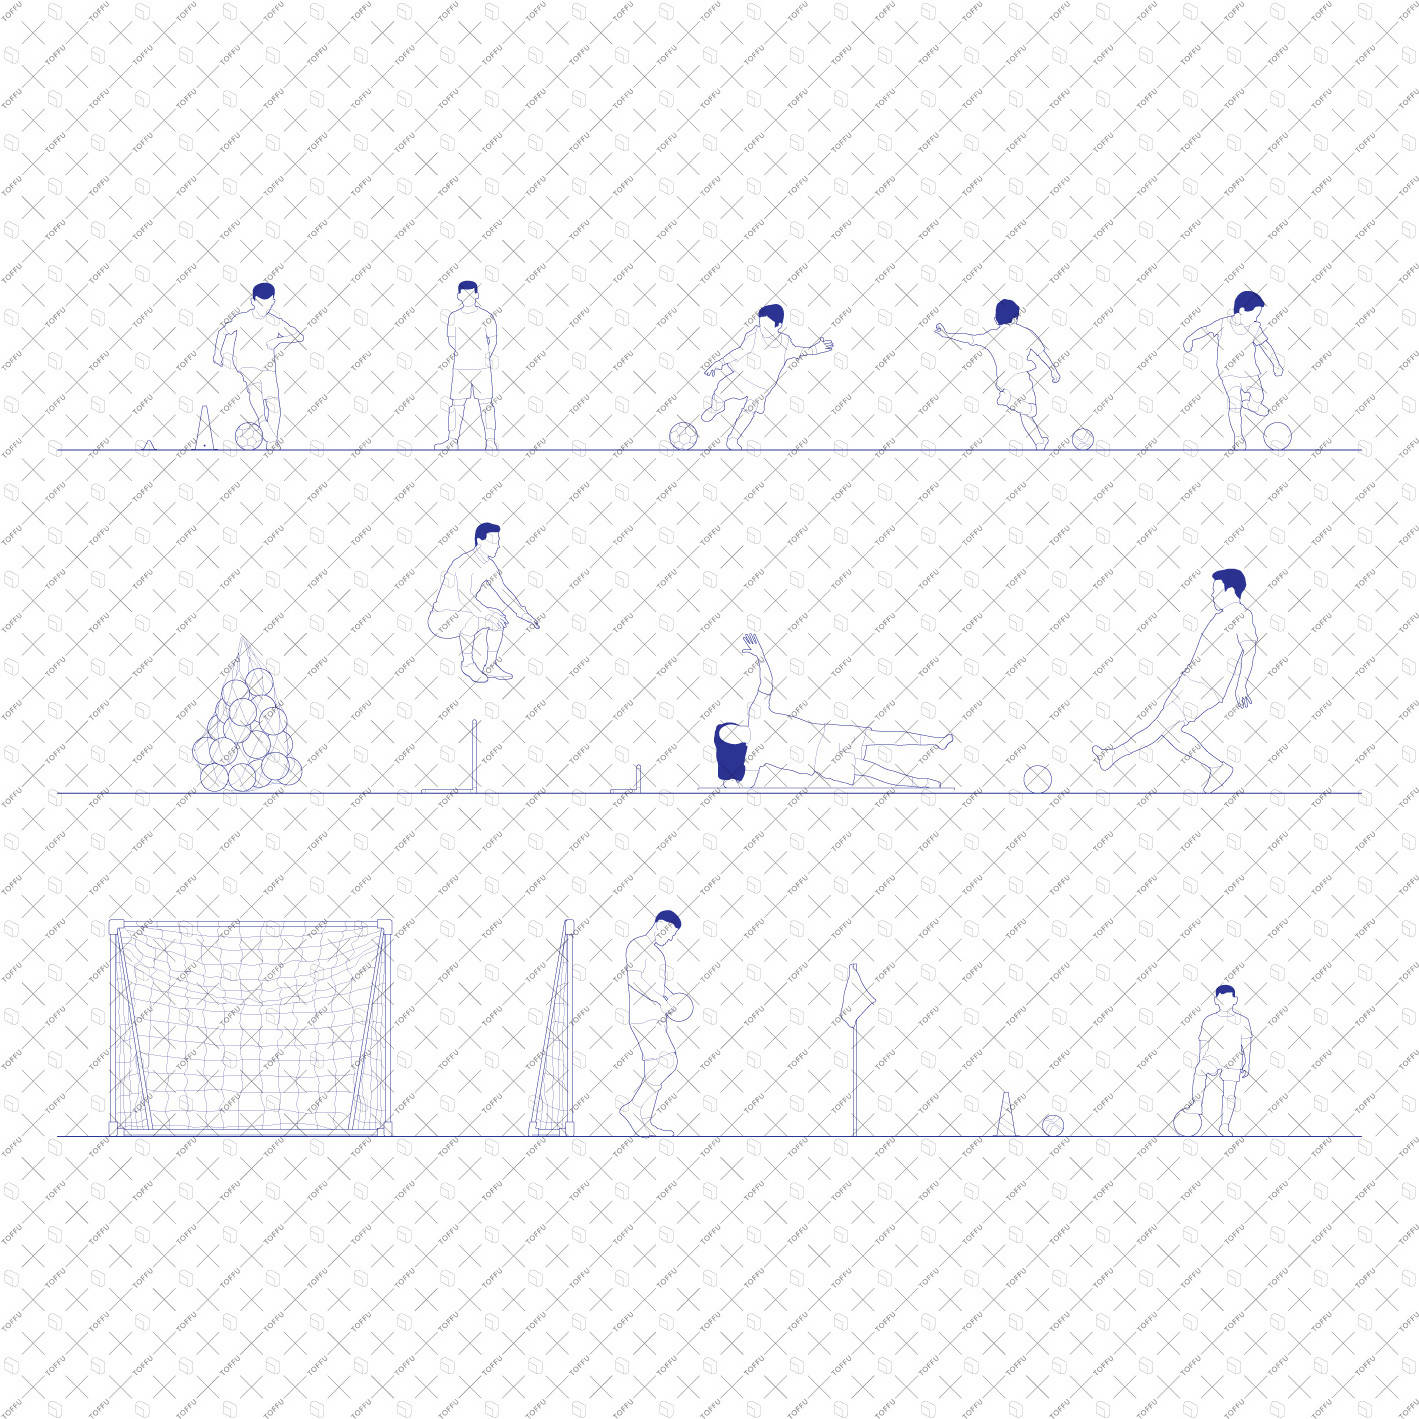 Cad People Playing Football / Soccer DWG | Toffu Co